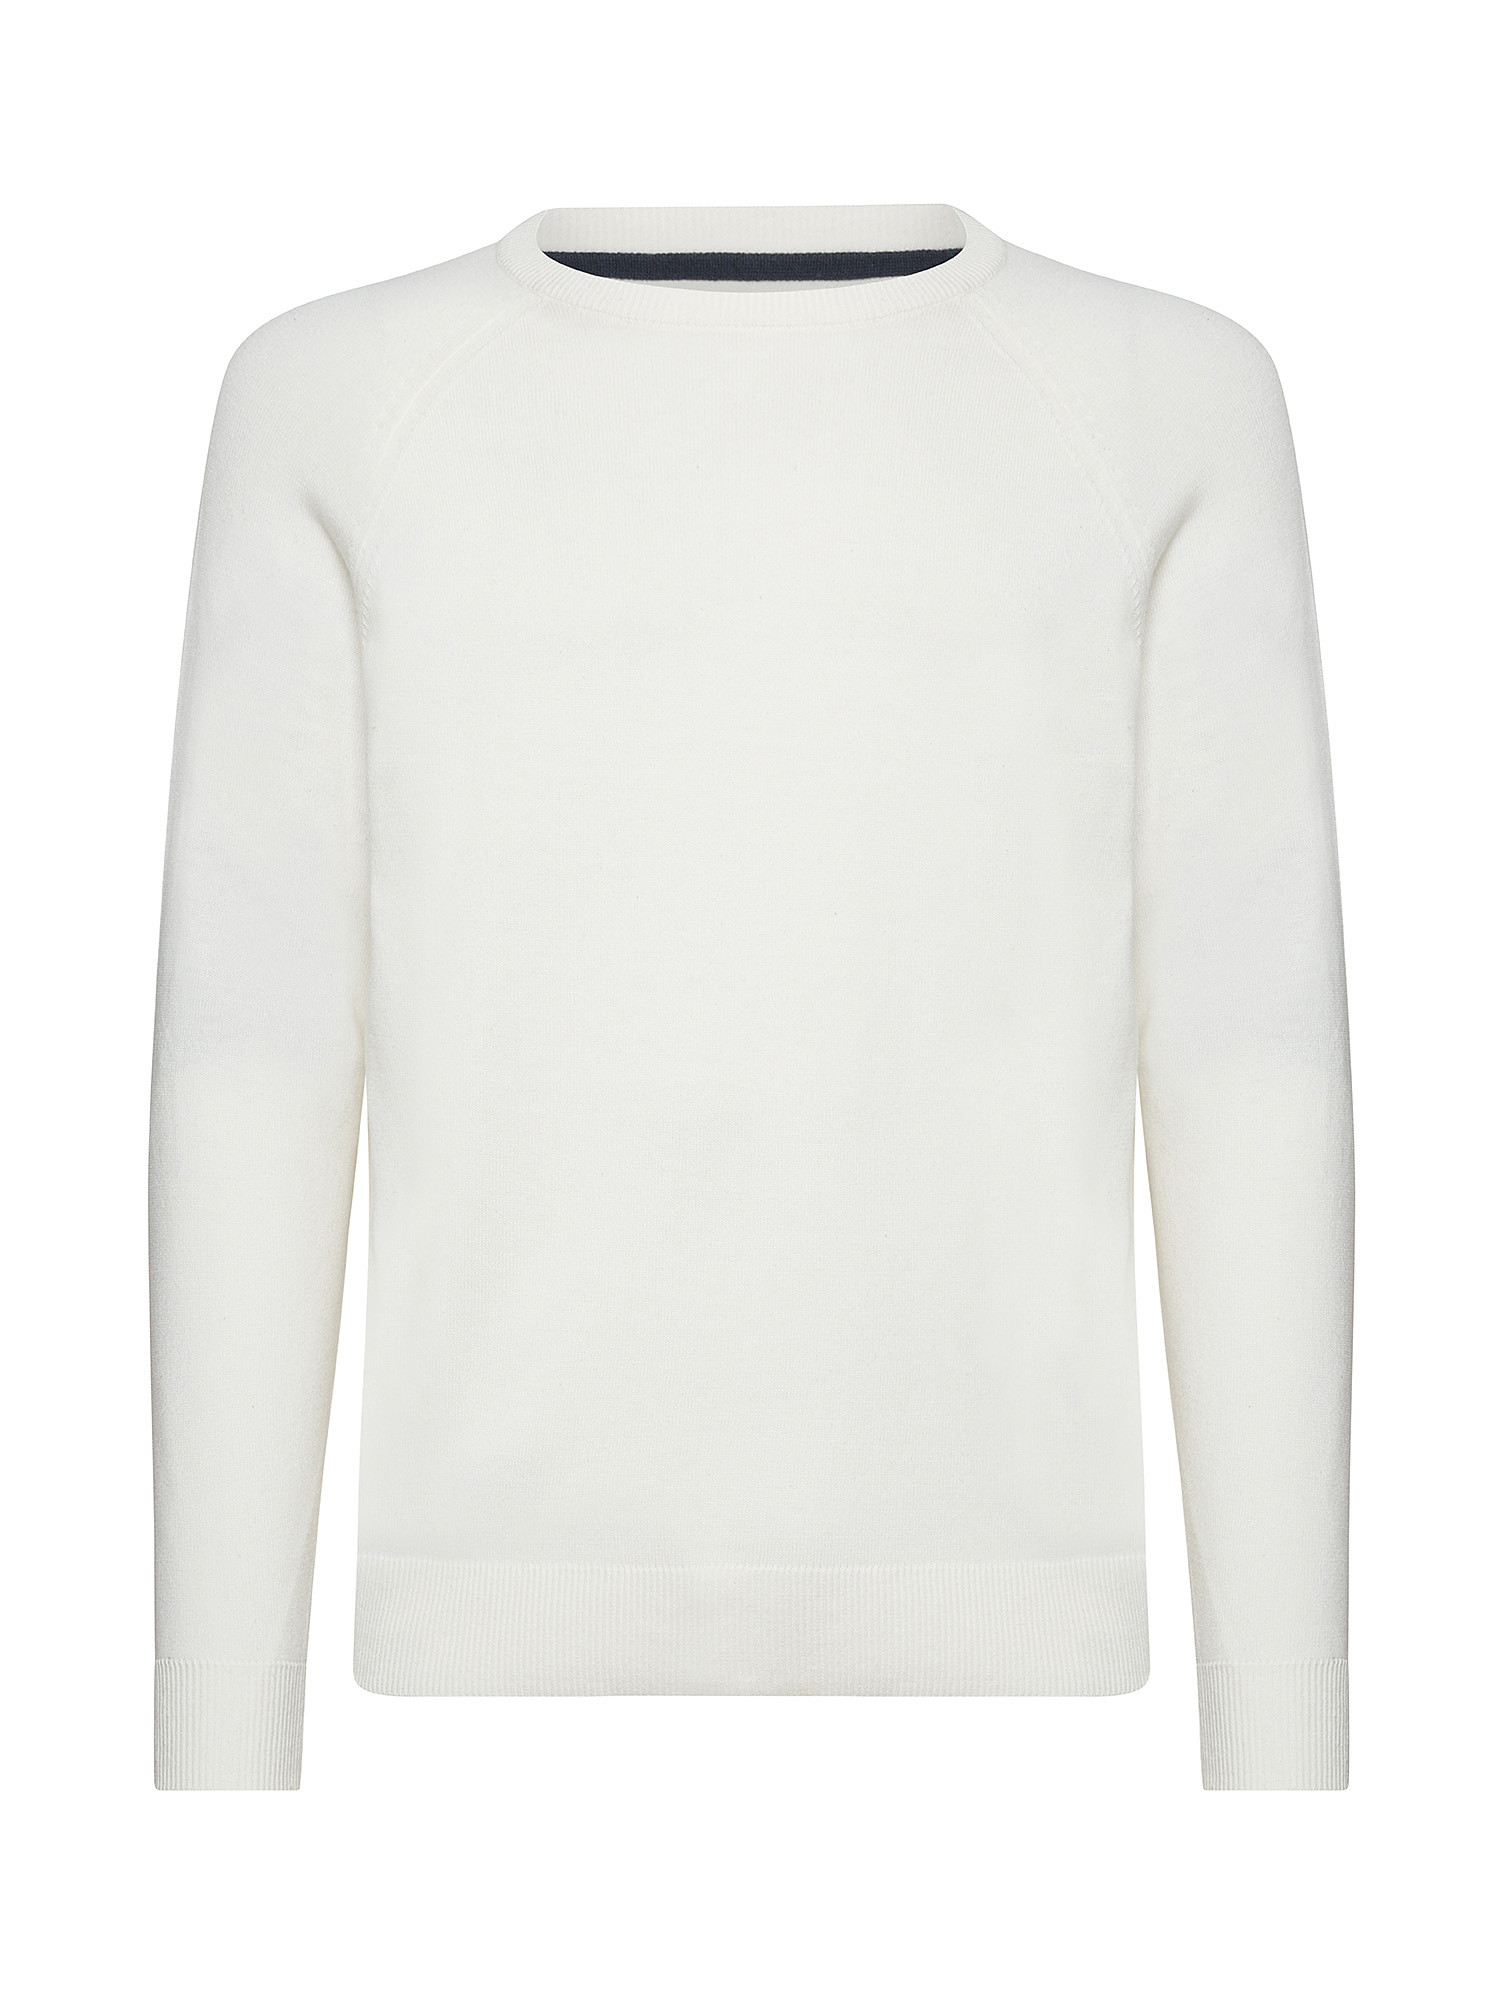 Pepe Jeans - Crewneck cotton pullover, White Ivory, large image number 0